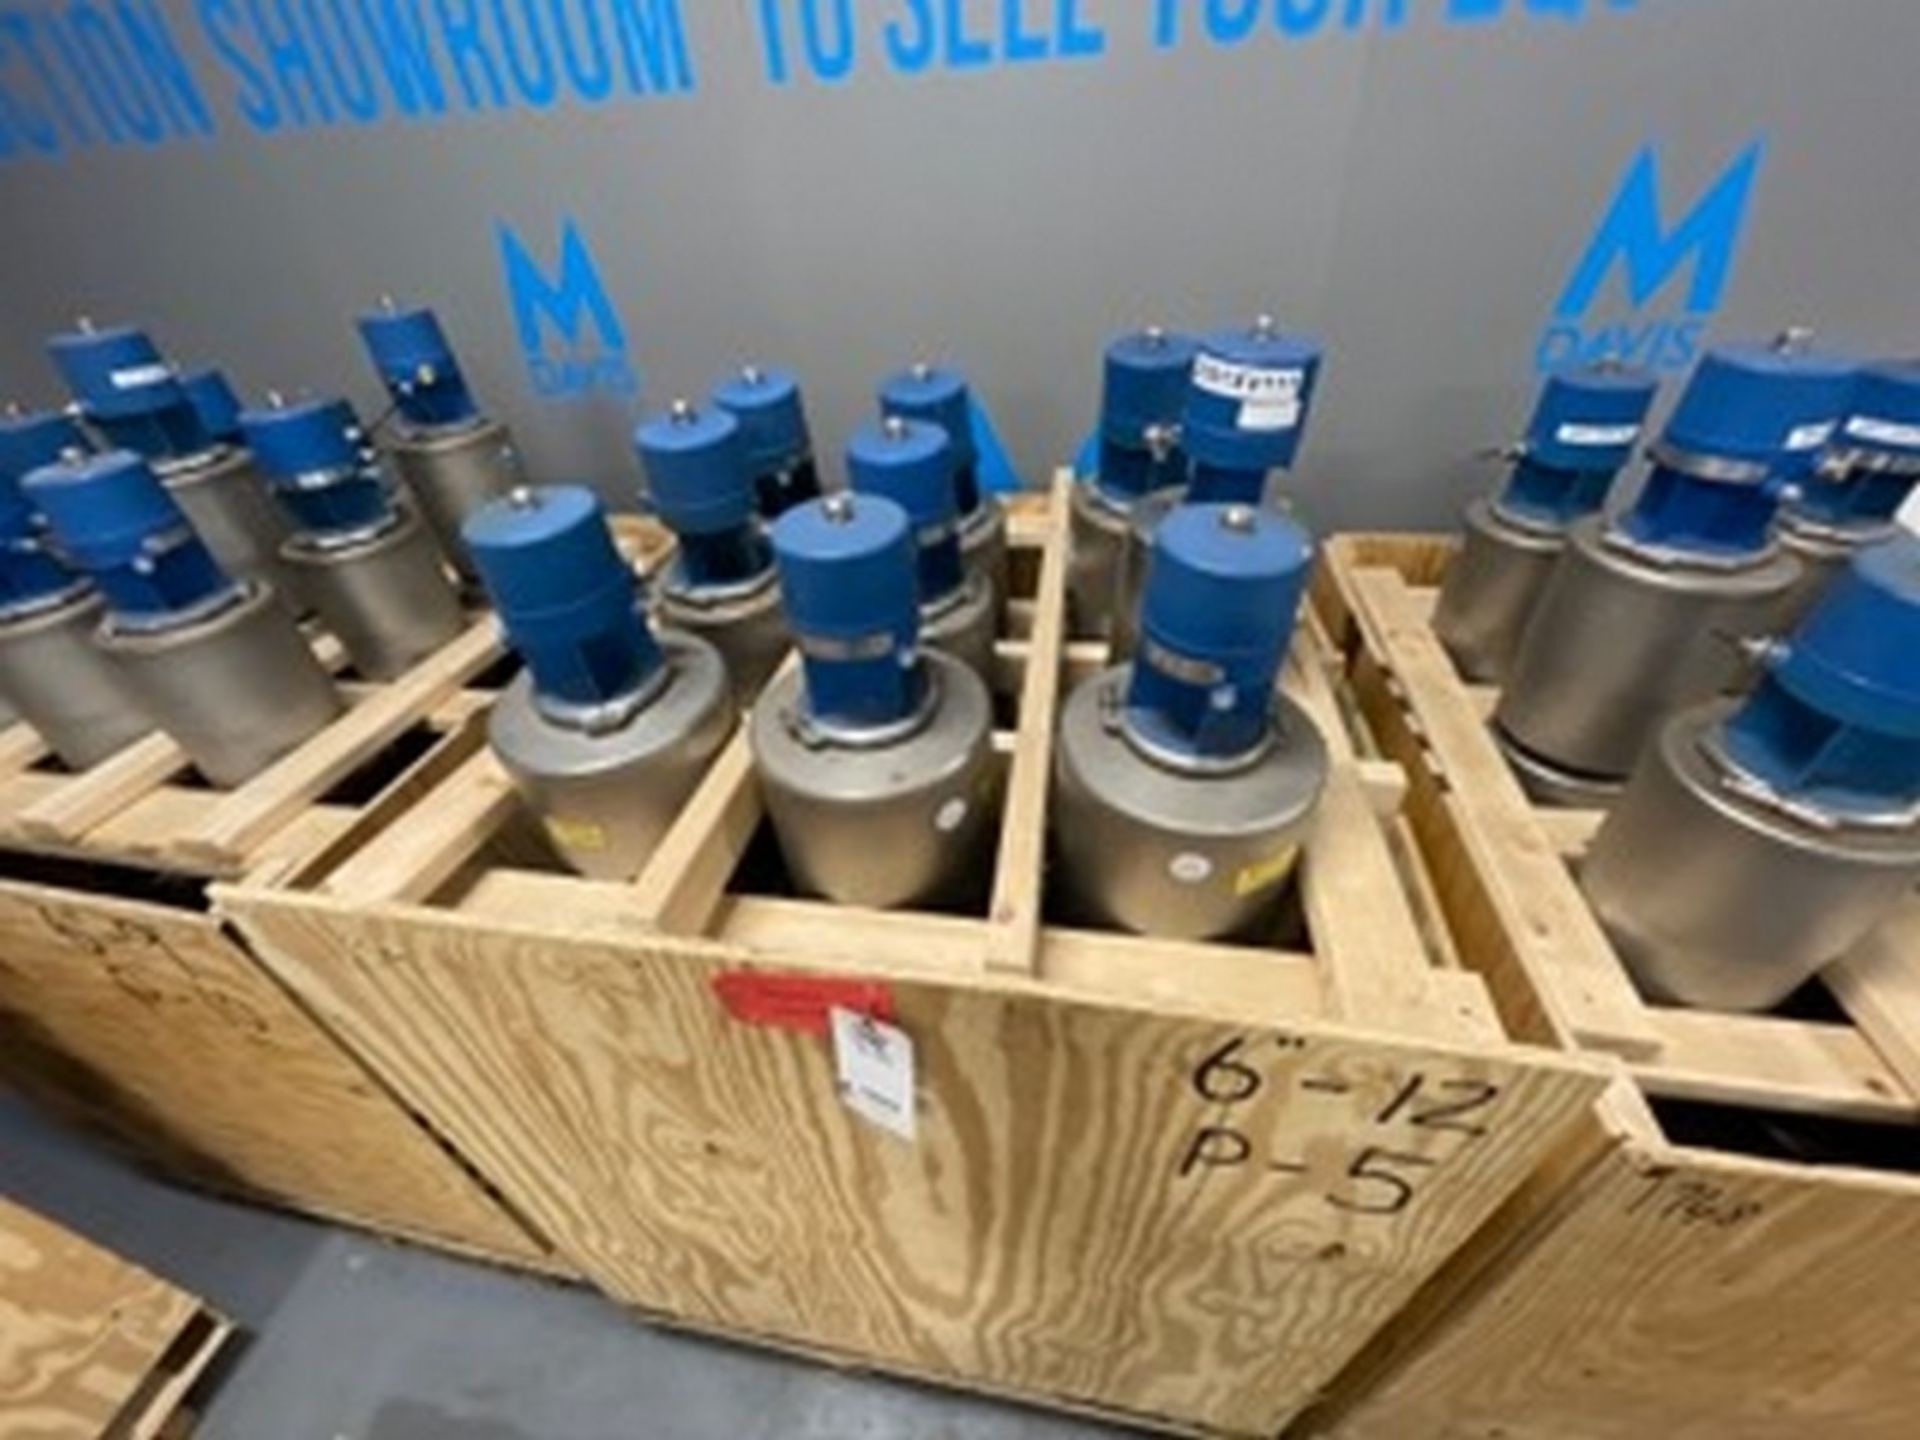 (9) GEA 6" S/S Air Valve Actuators with Think Tops(NOTE: Bodies Not Included; Formerly Used in